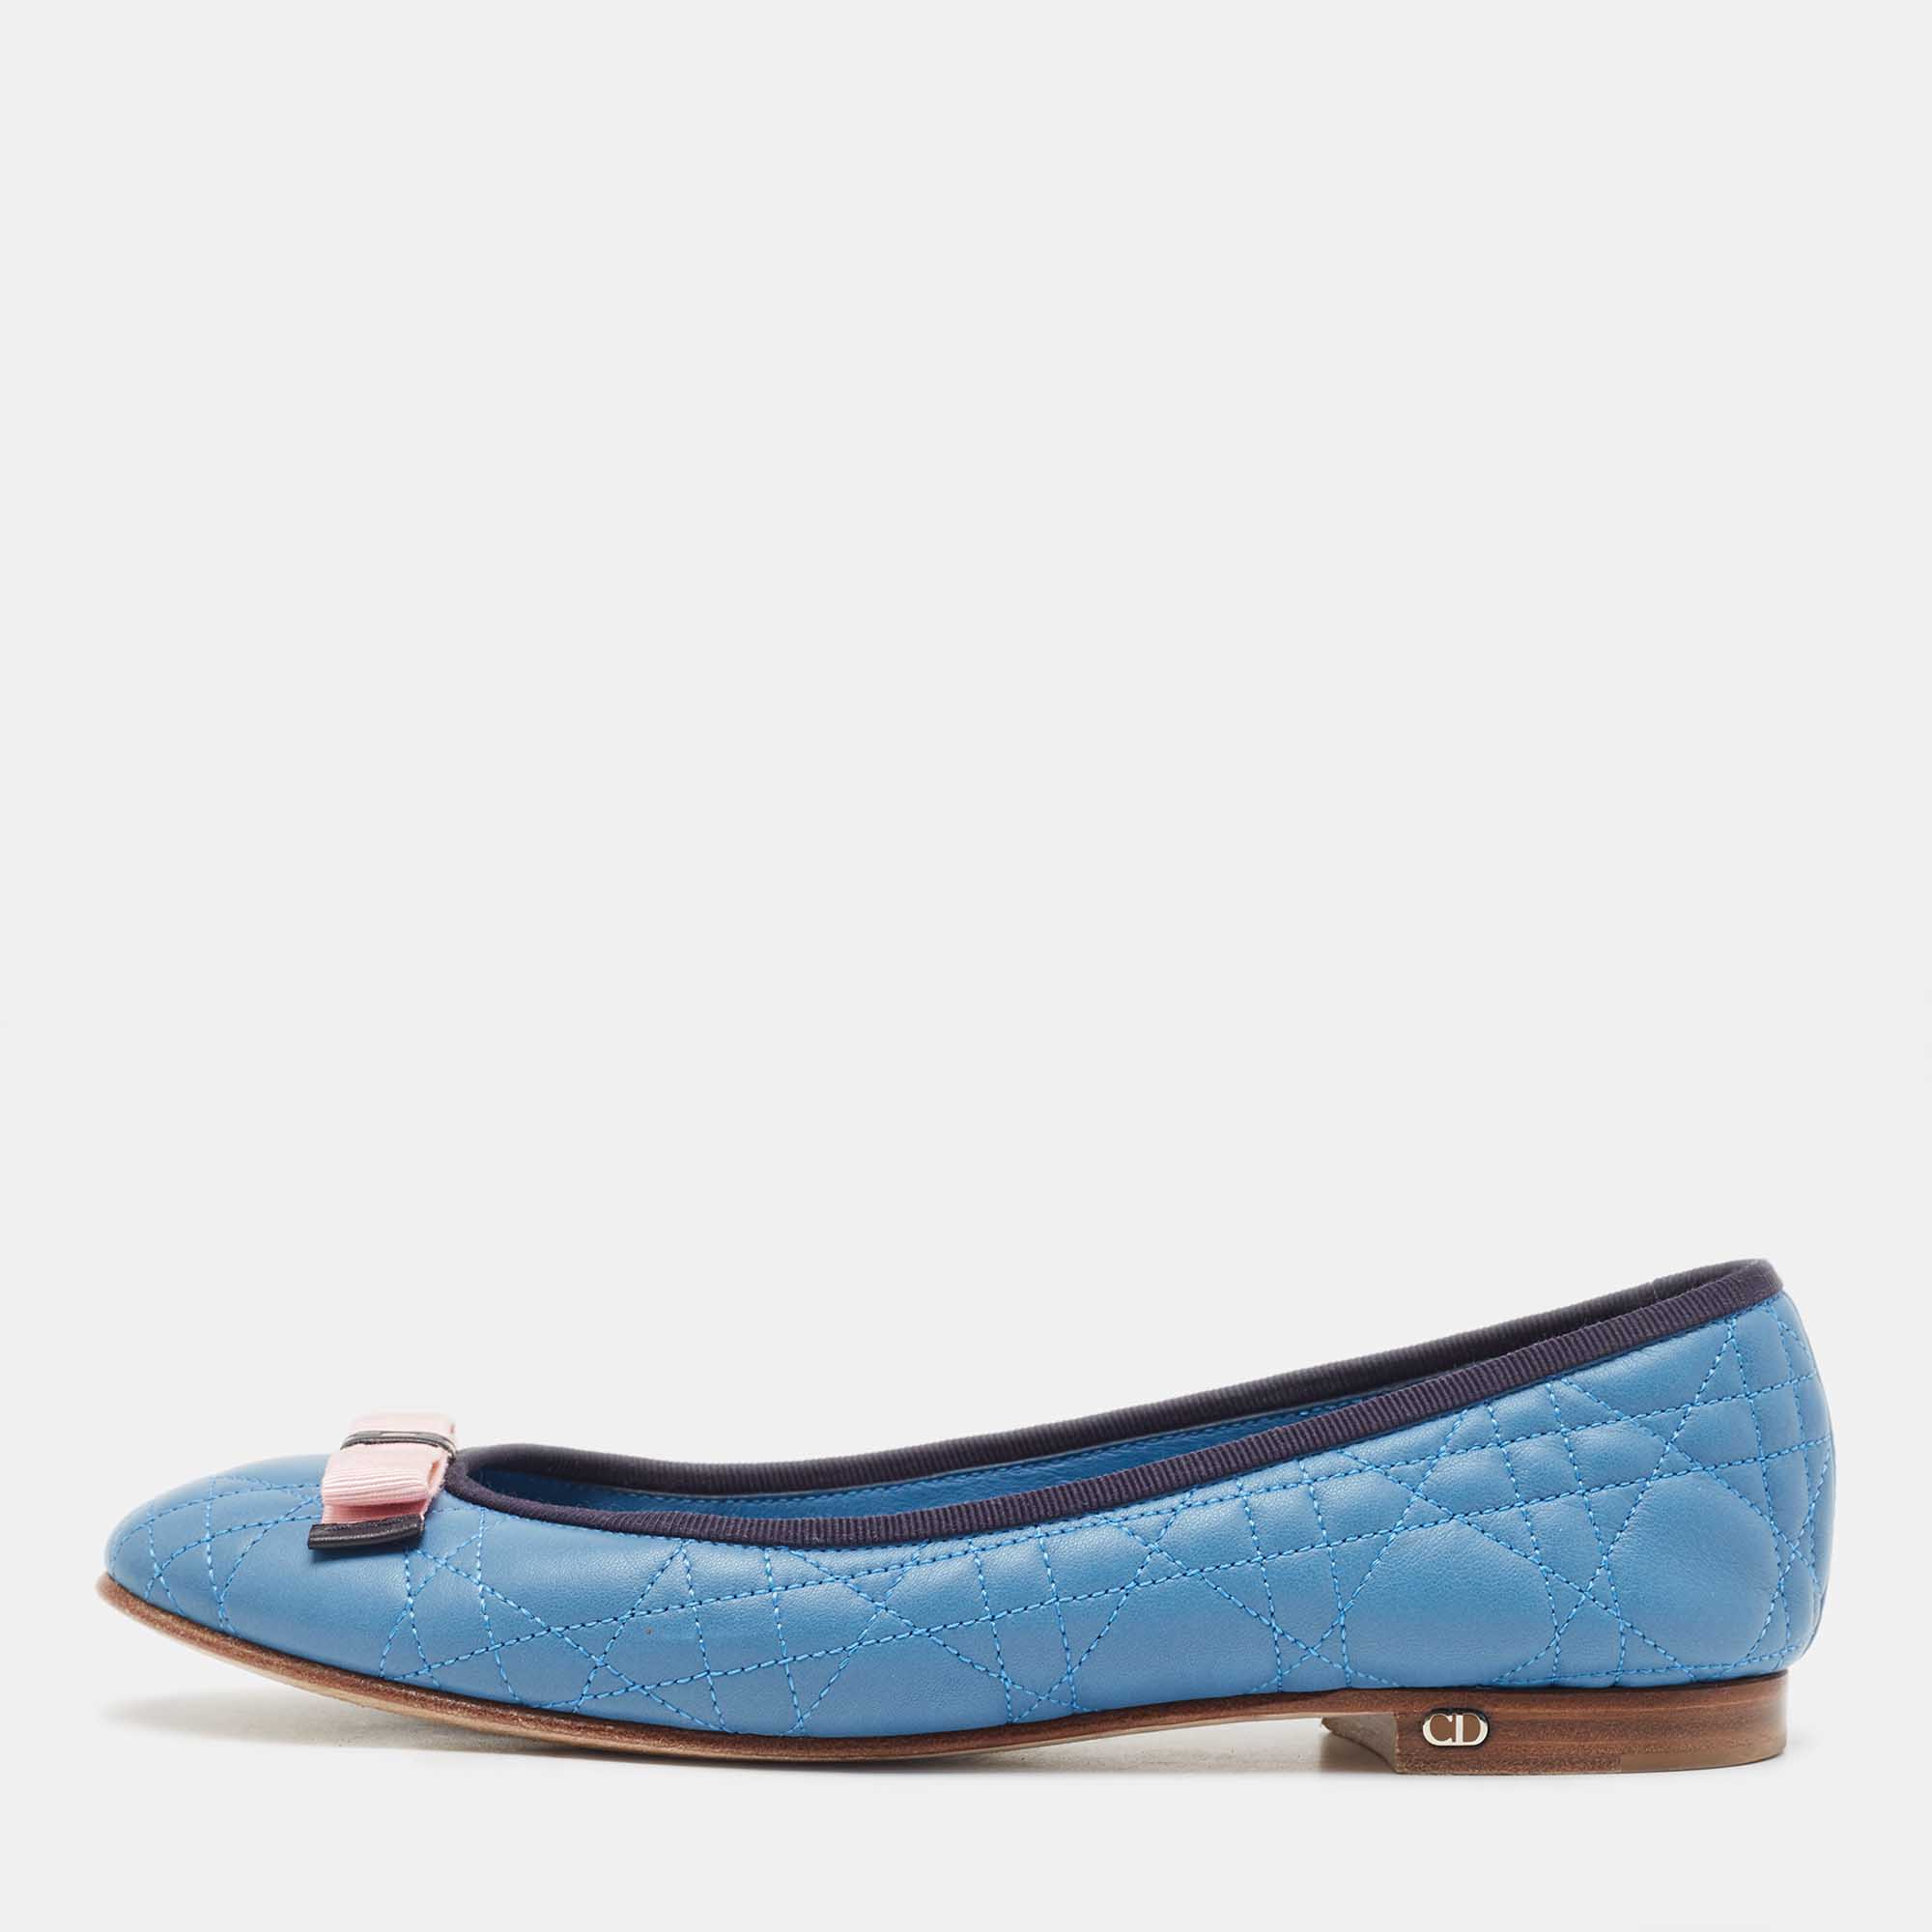 

Dior Blue Cannage Leather Bow Ballet Flats Size